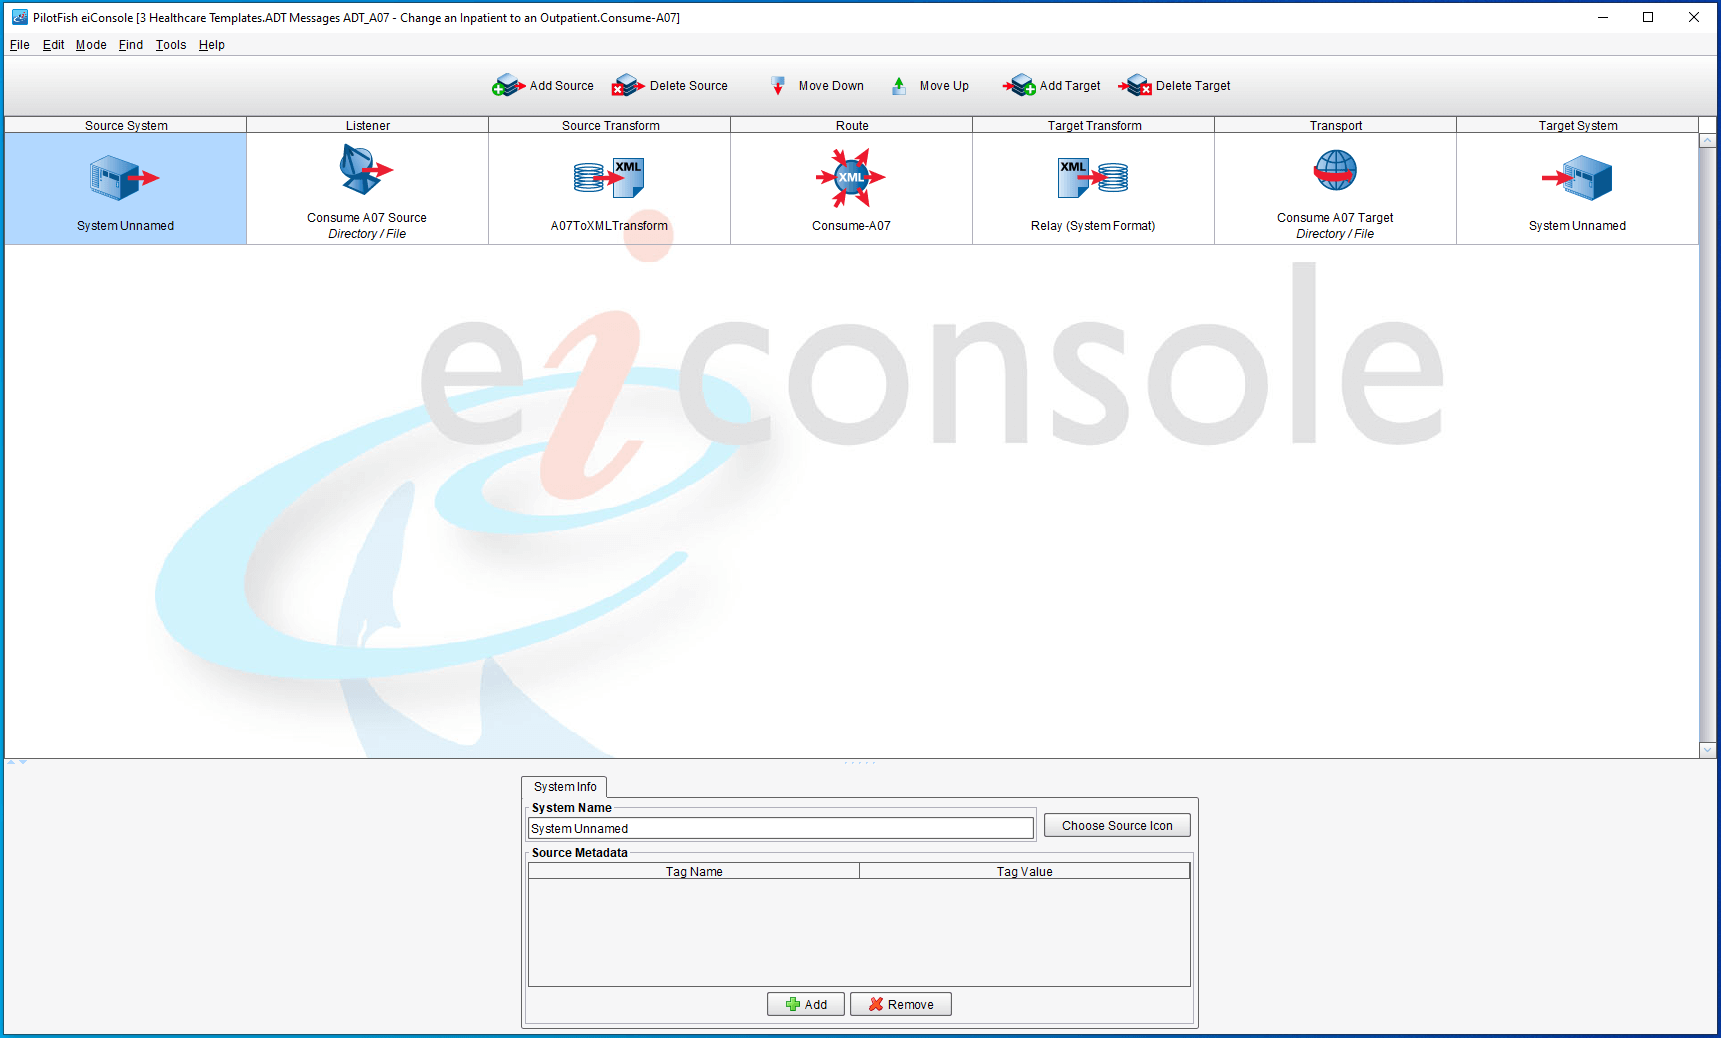 Route Interface Configuration in the eiConsole by PilotFish